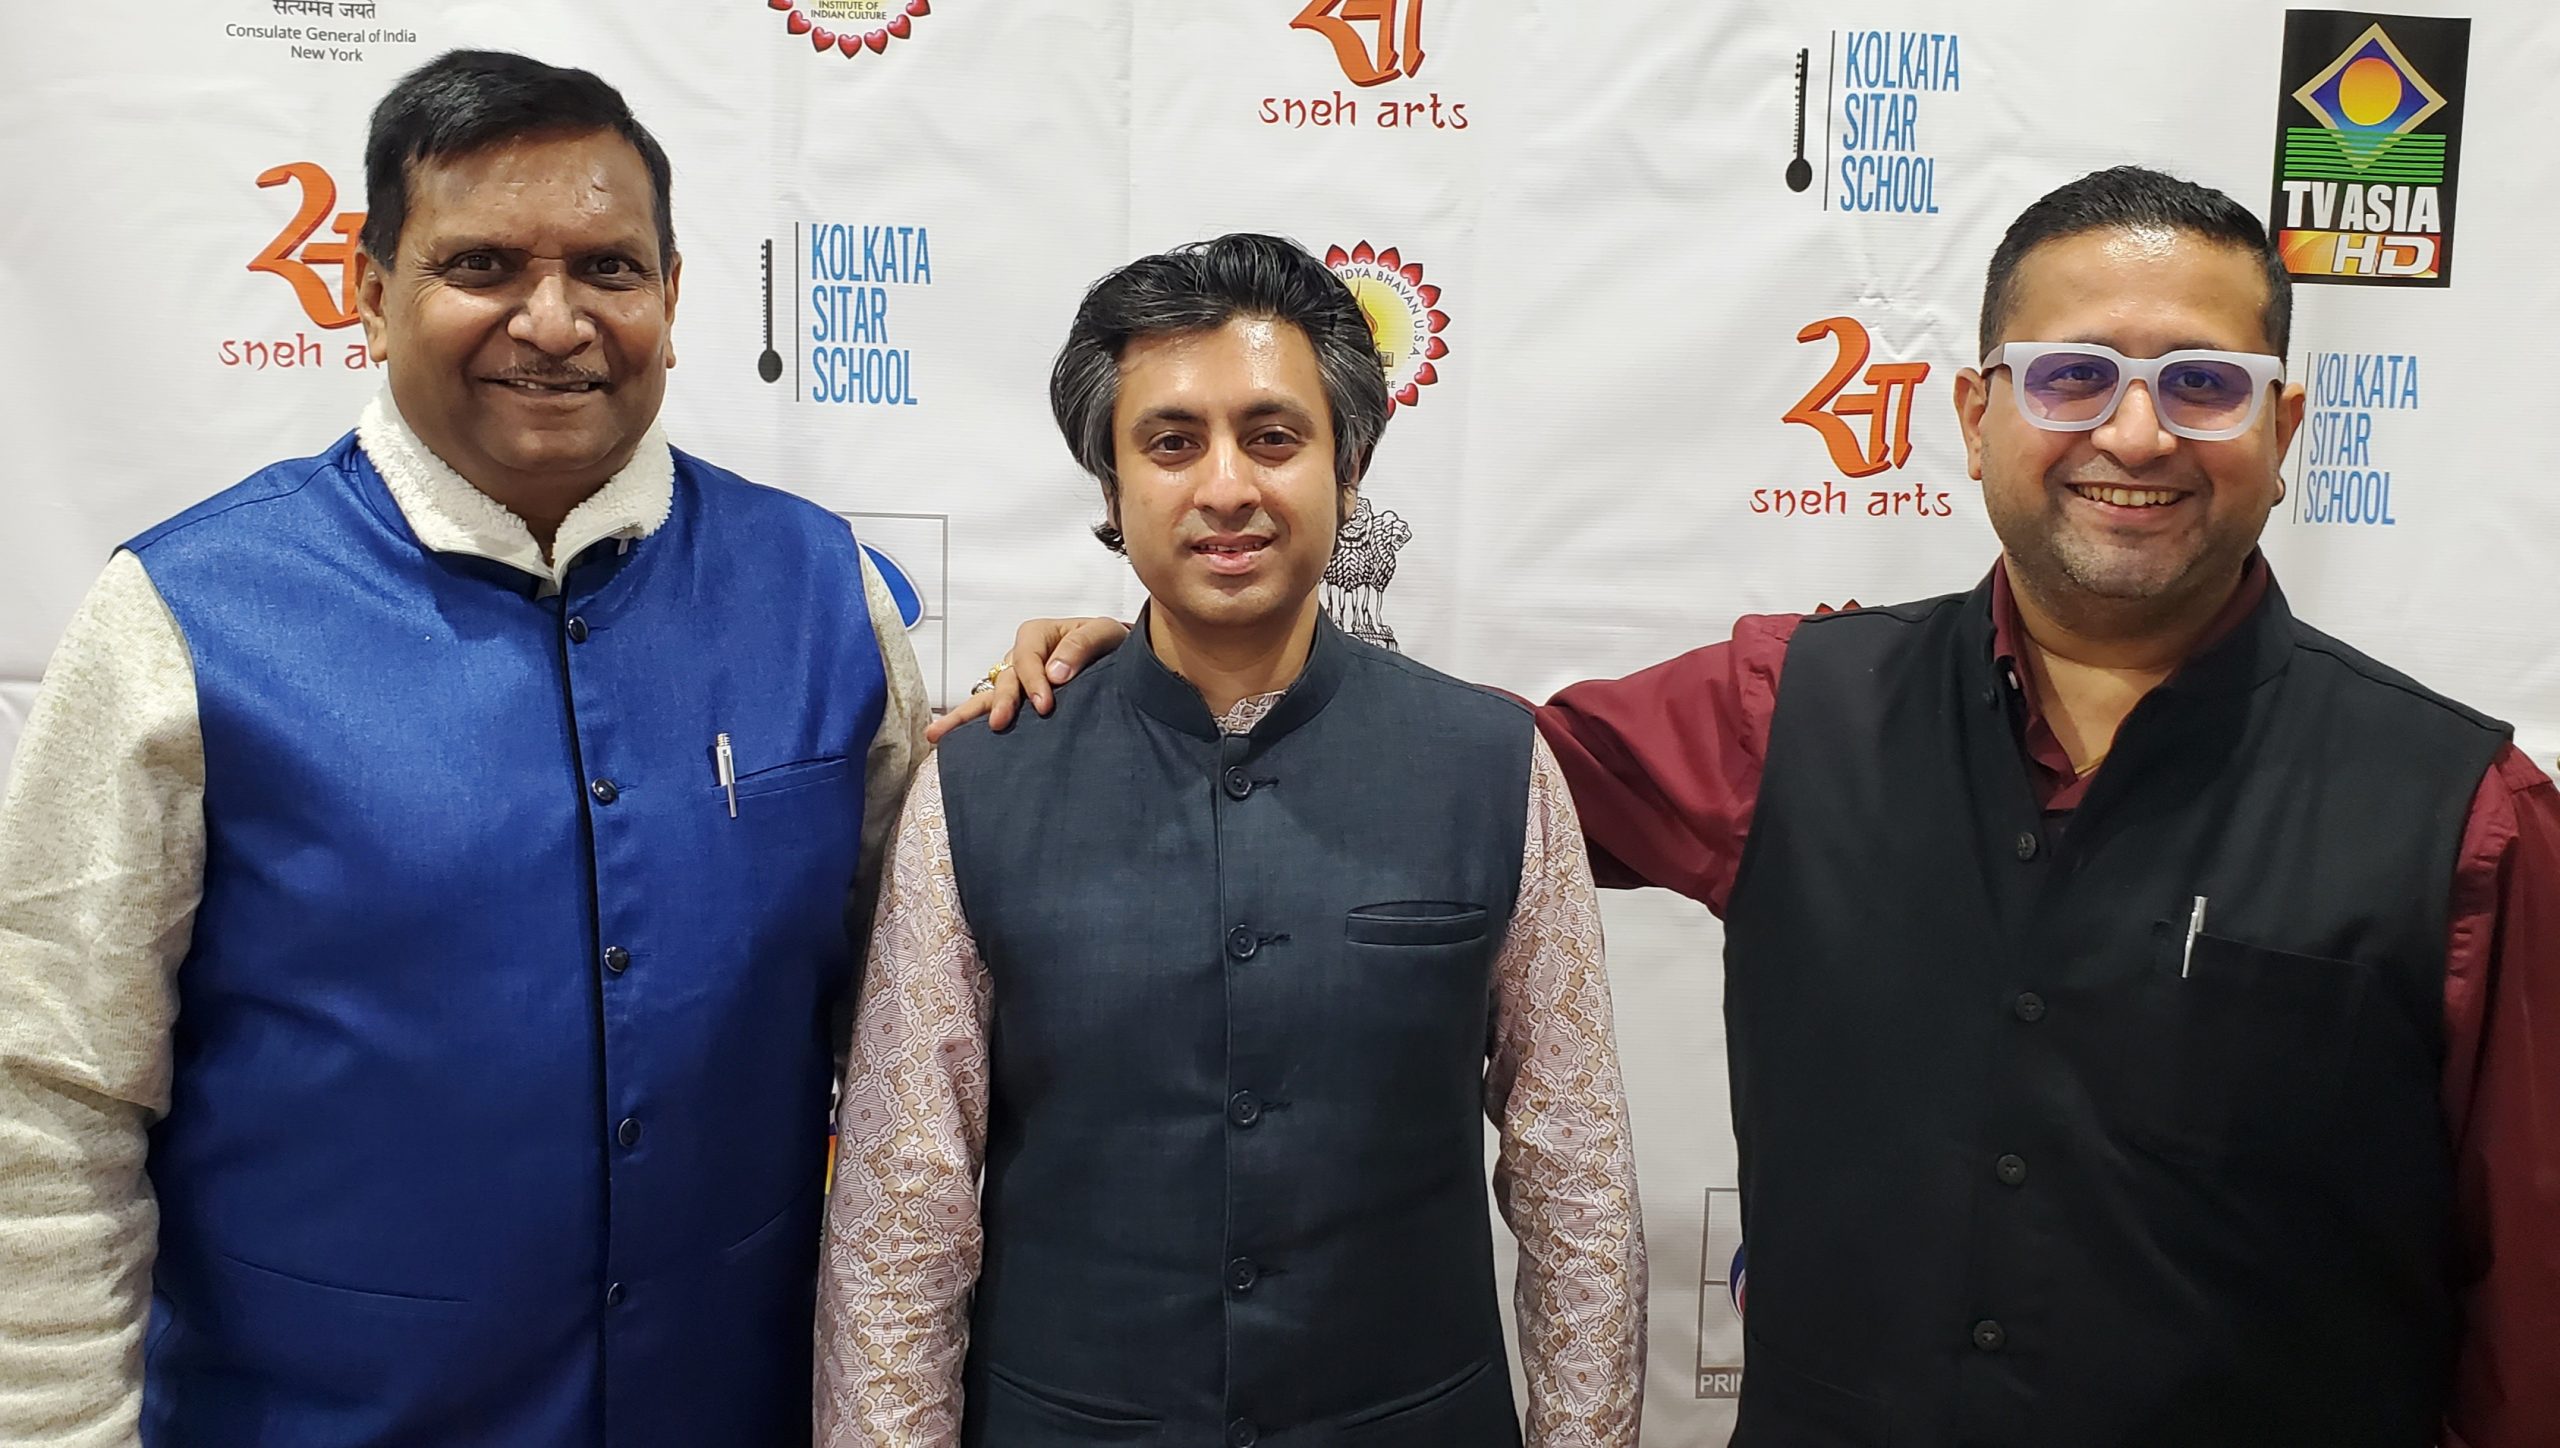 NORTH AMERICAN ARTISTS PERFORM AT CHAAR PRAHAR INDIAN CLASSICAL MUSIC FESTIVAL